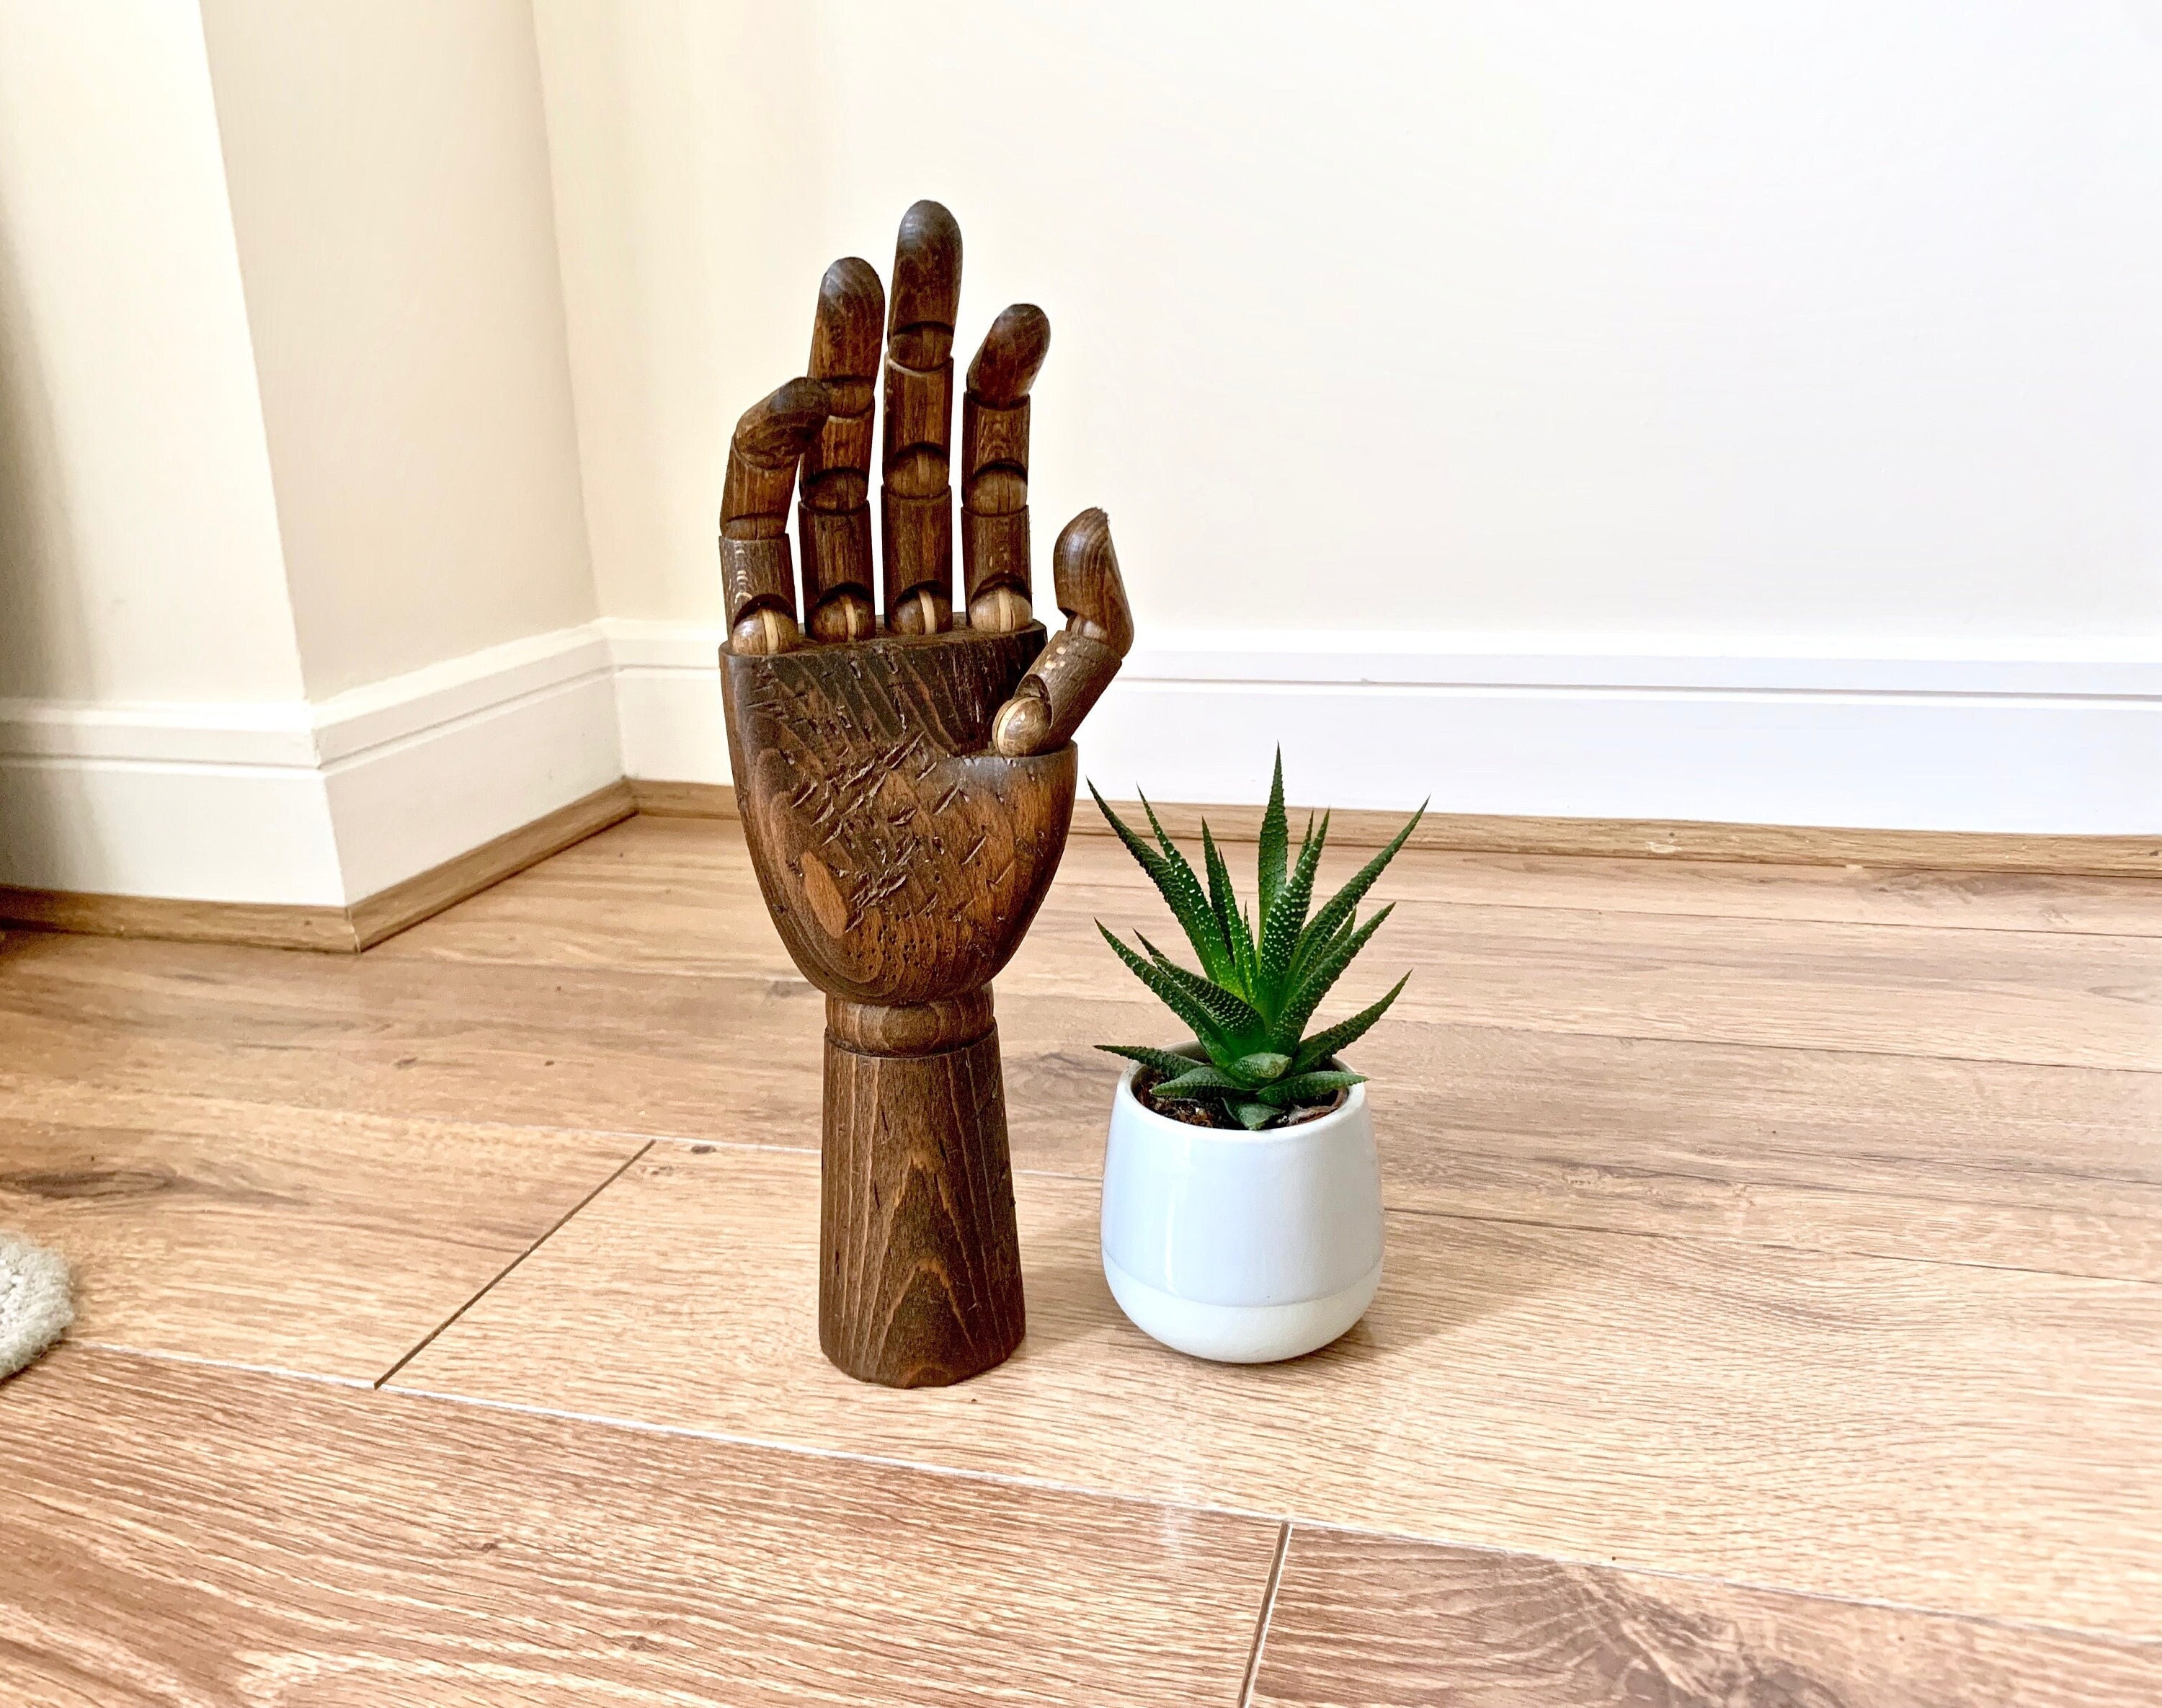 Tattooed Wooden Movable Joint Hand Decor